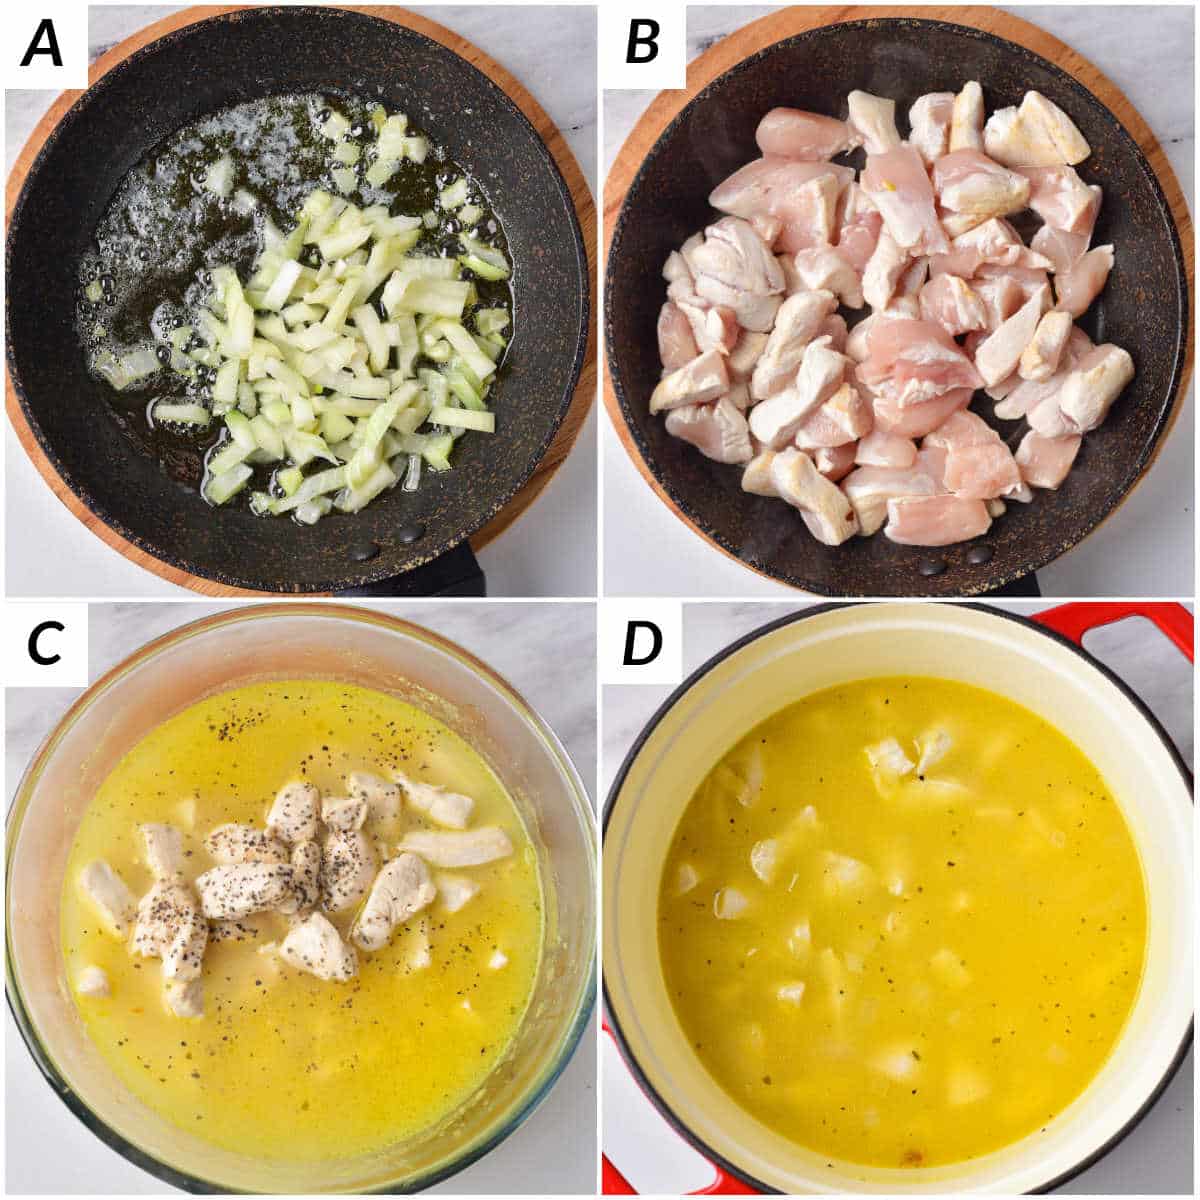 image collage showing the first part of the process for making chicken casserole